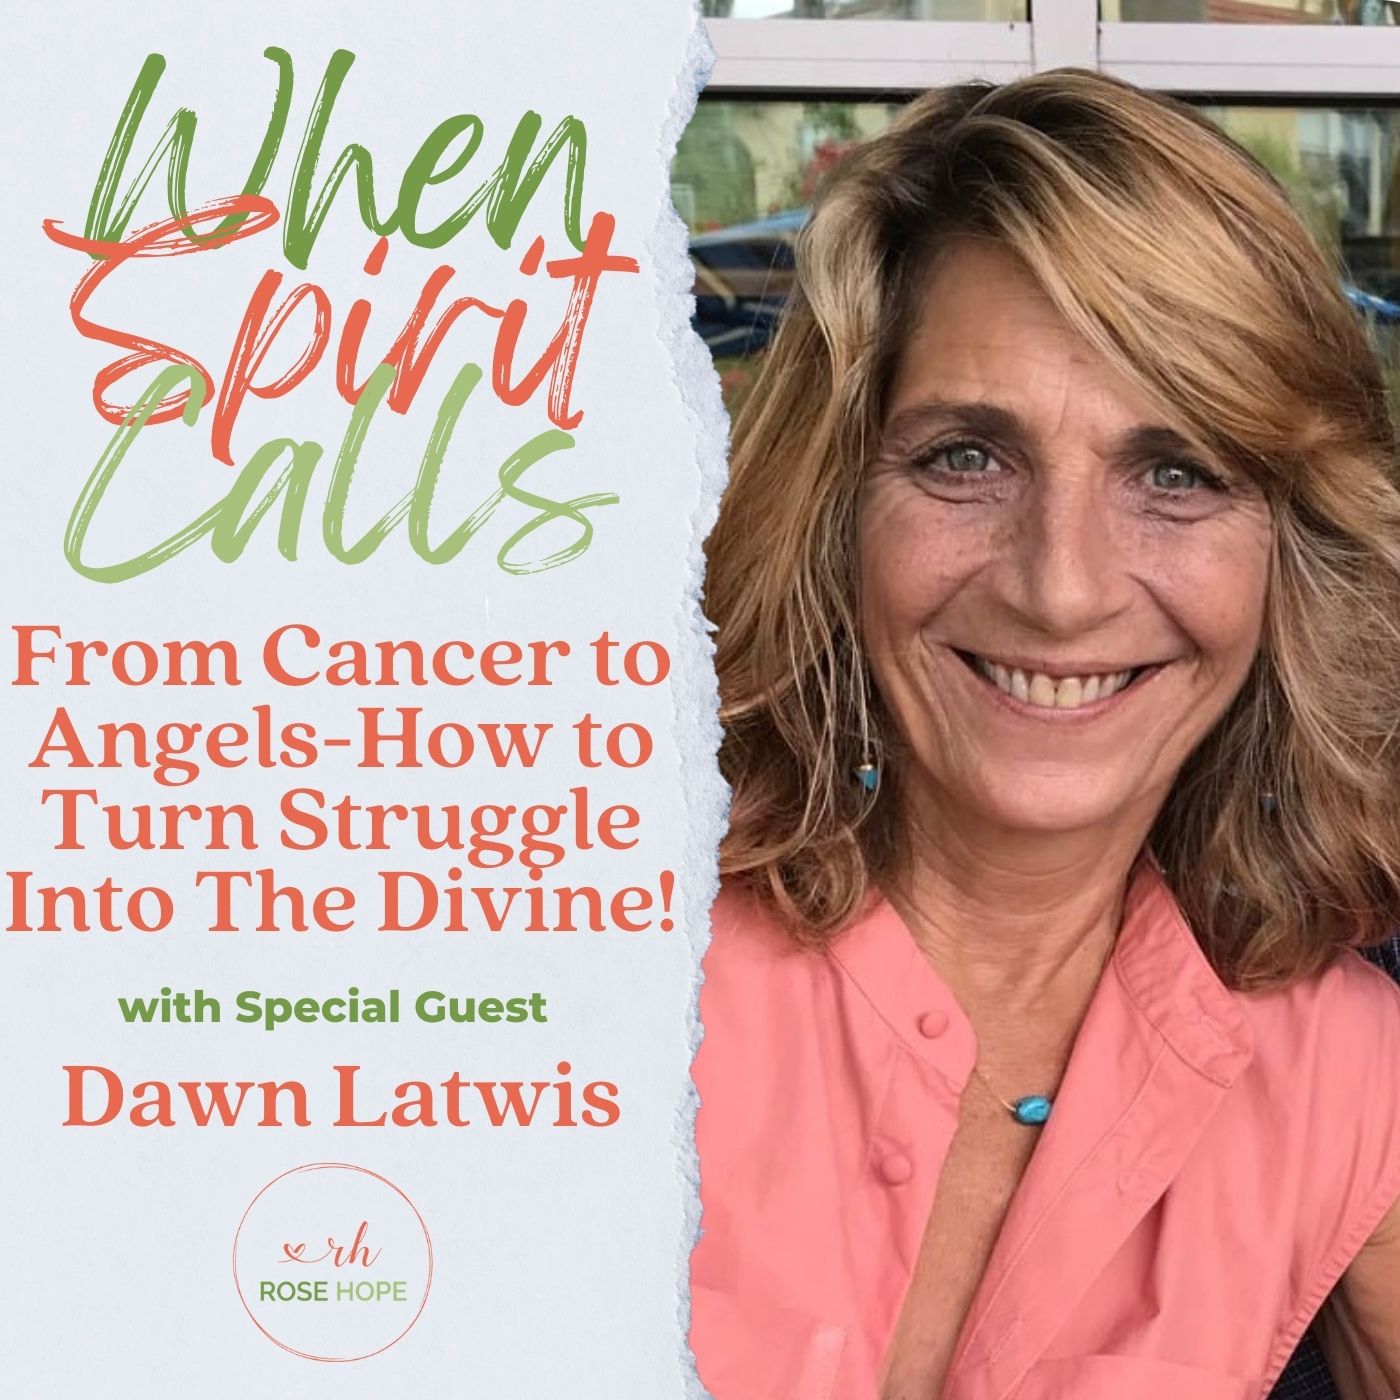 From Cancer to Angels - How to Turn Struggle Into The Divine!